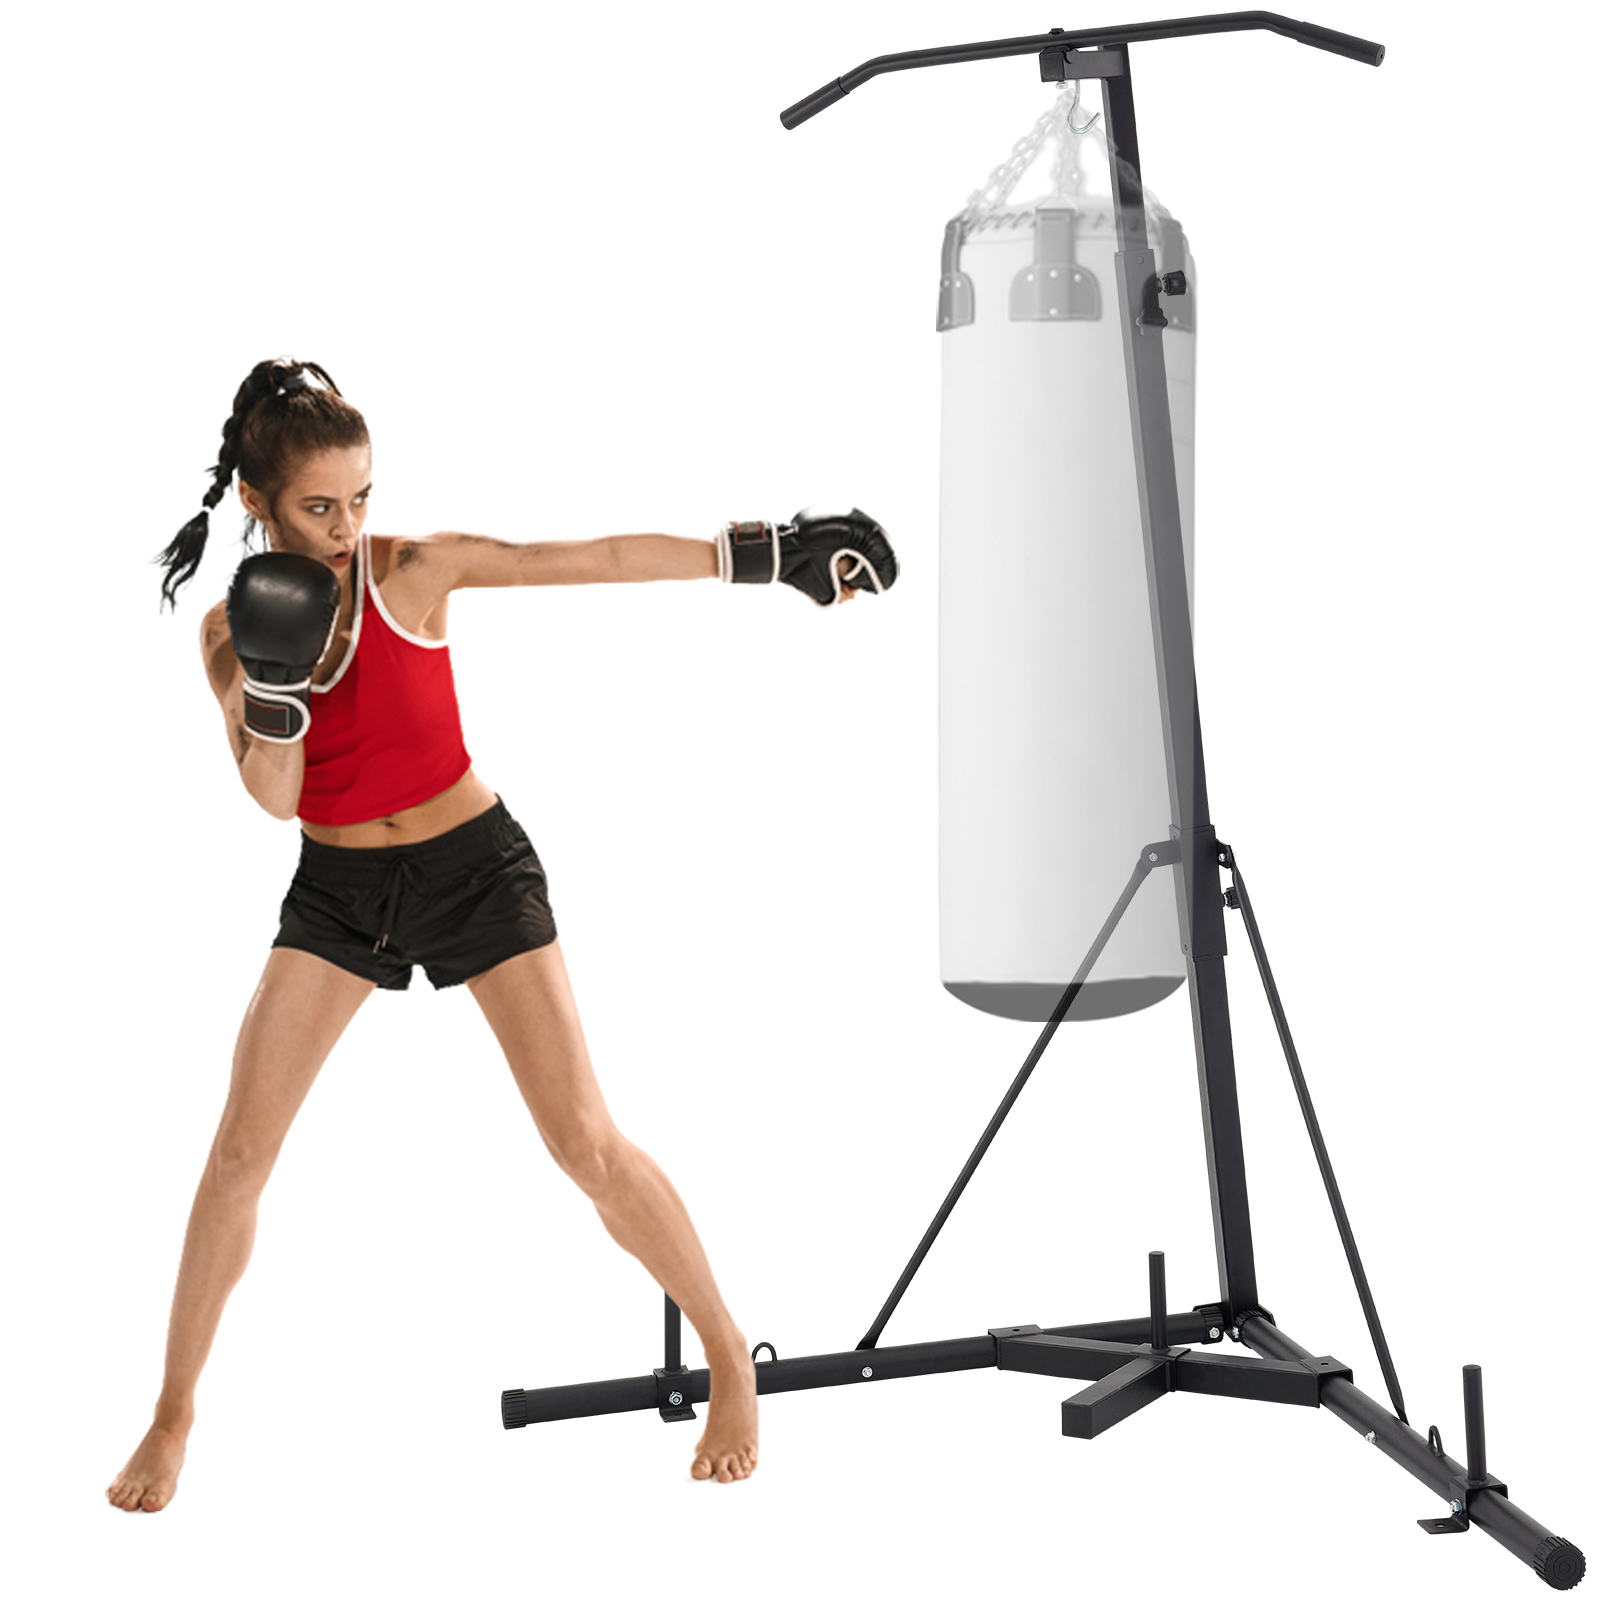 VEVOR 2 in 1 Punching Bag Stand,Folding Heavy Bag Stand with Adjustable  Height,Heavy Duty Boxing Portable Punching Bag Stand Steel Sandbag Rack  Freestanding Up to 132 lbs for Home Fitness | VEVOR US